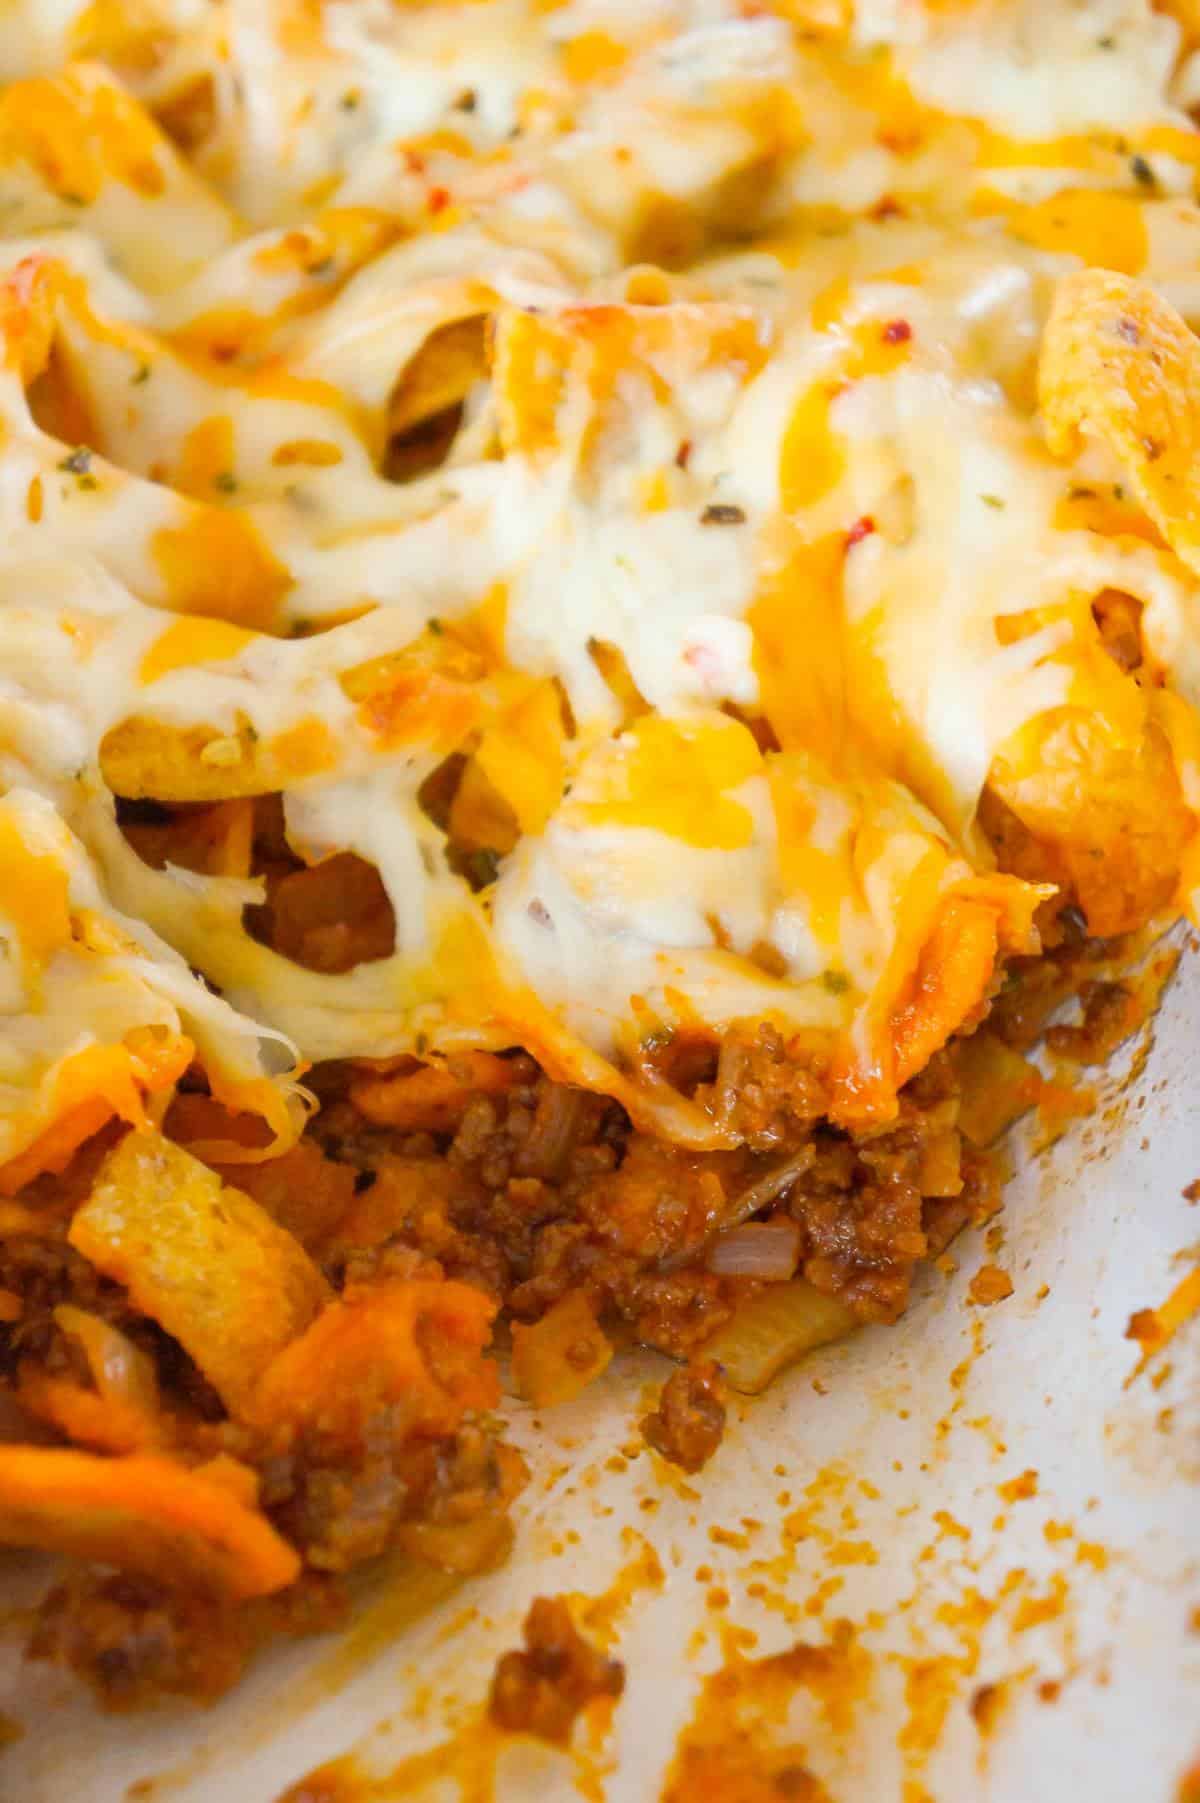 Sloppy Joe Frito Pie is a delicious casserole recipe with ground beef and onions tossed in homemade sloppy joe sauce and topped with Fritos corn chips and shredded cheese.